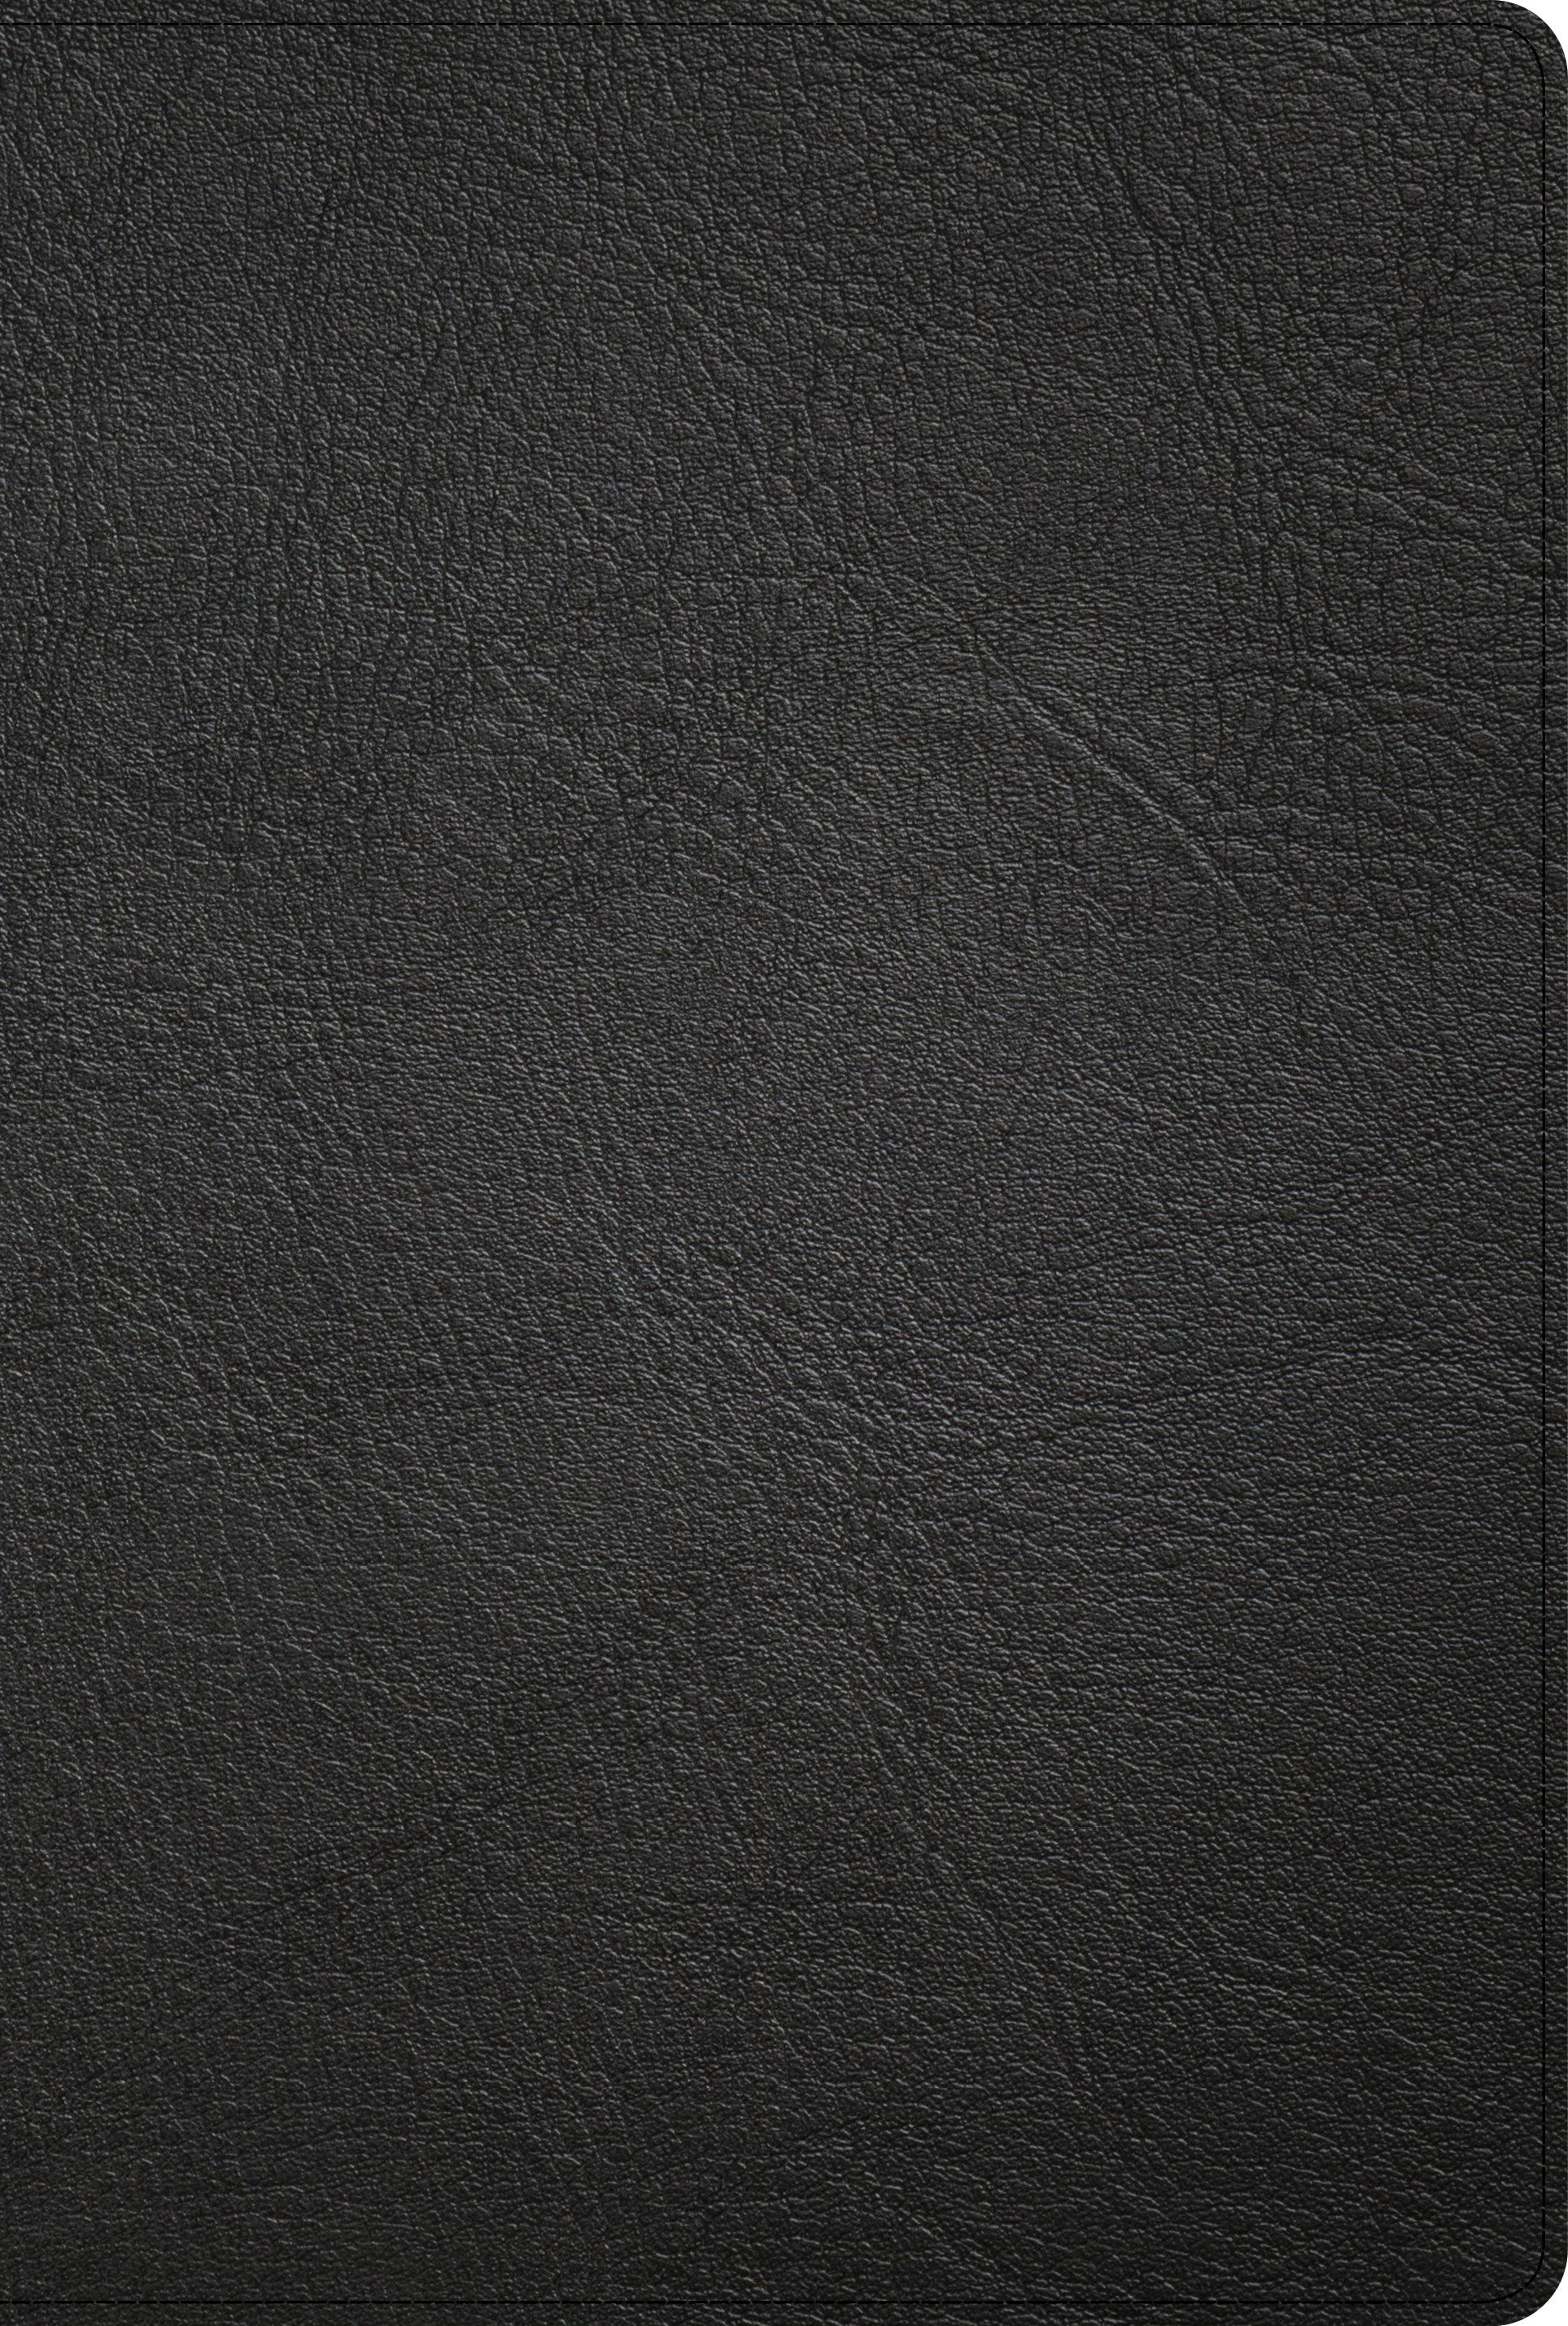 Seed of Abraham Christian Bookstore - (In)Courage - KJV Large Print Thinline Bible-Black Genuine Leather